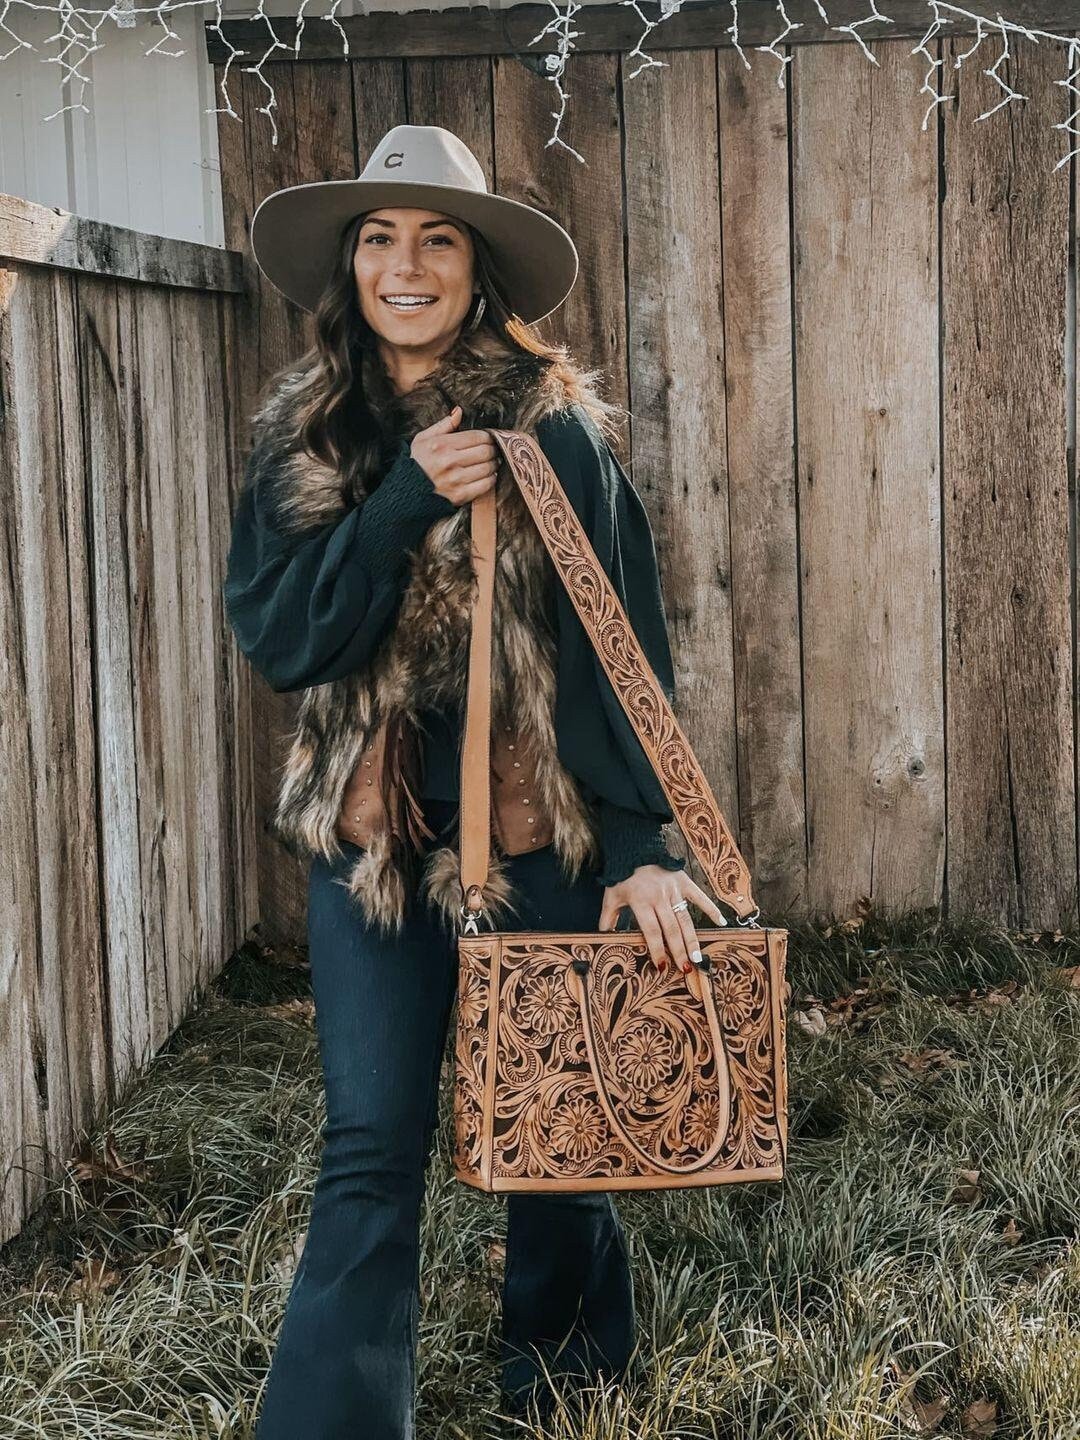 Leather Tote | Handcrafted Tooled Bag | Floral Bag | Custom options | Western Purse | Strap Included